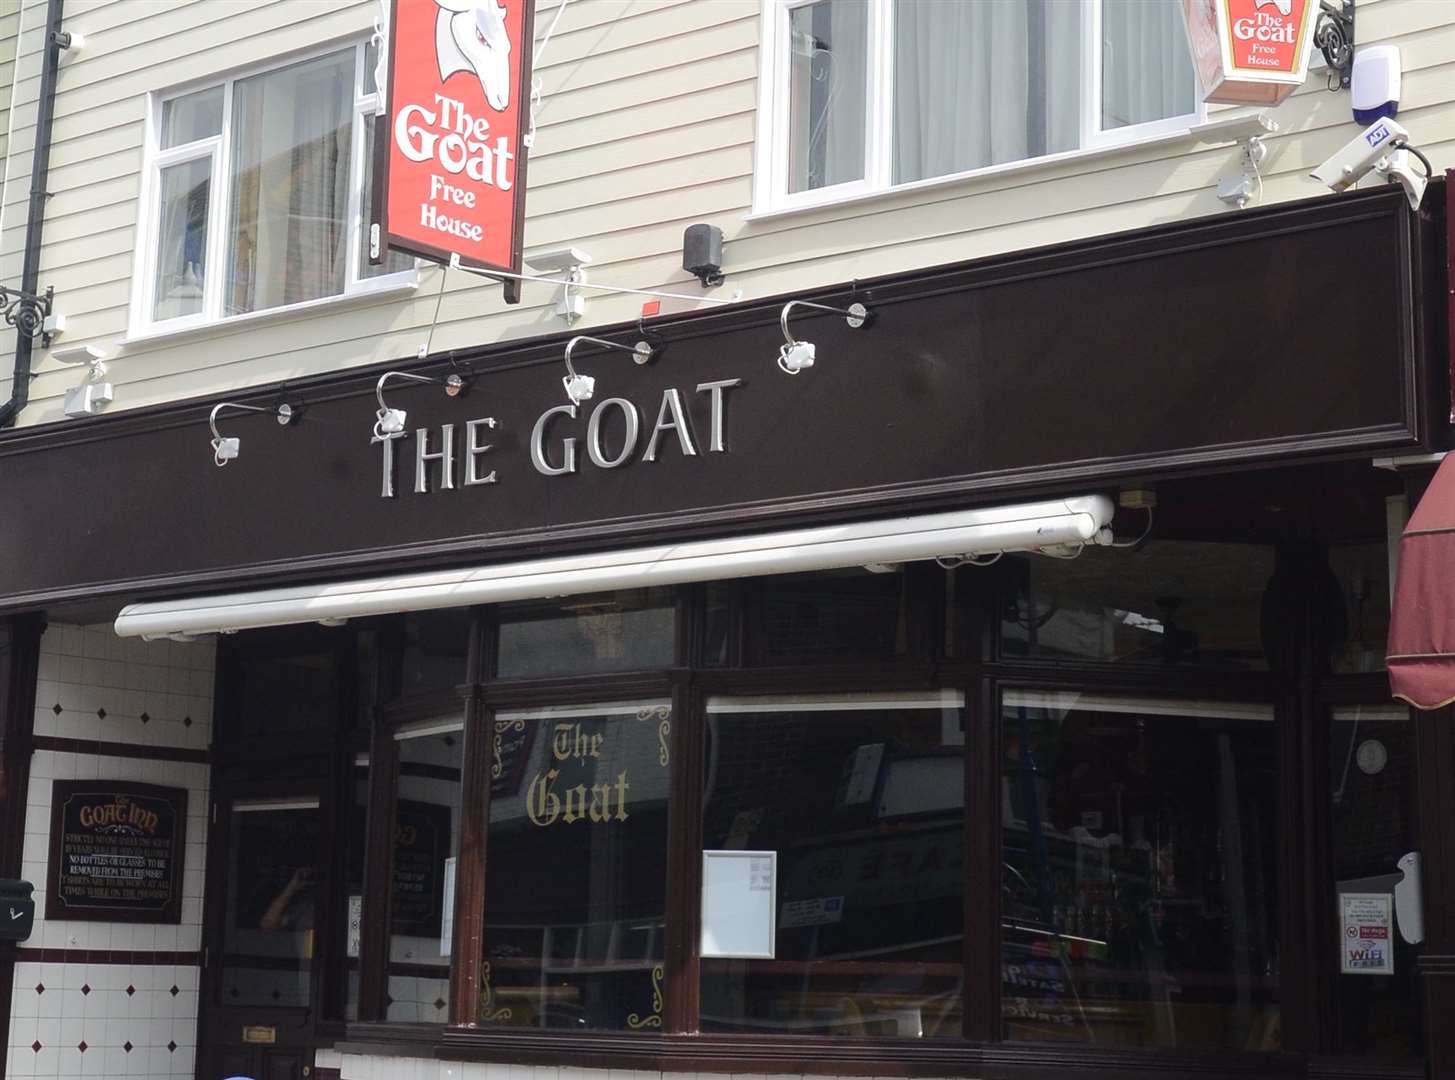 The Goat pub in Sheerness High Street